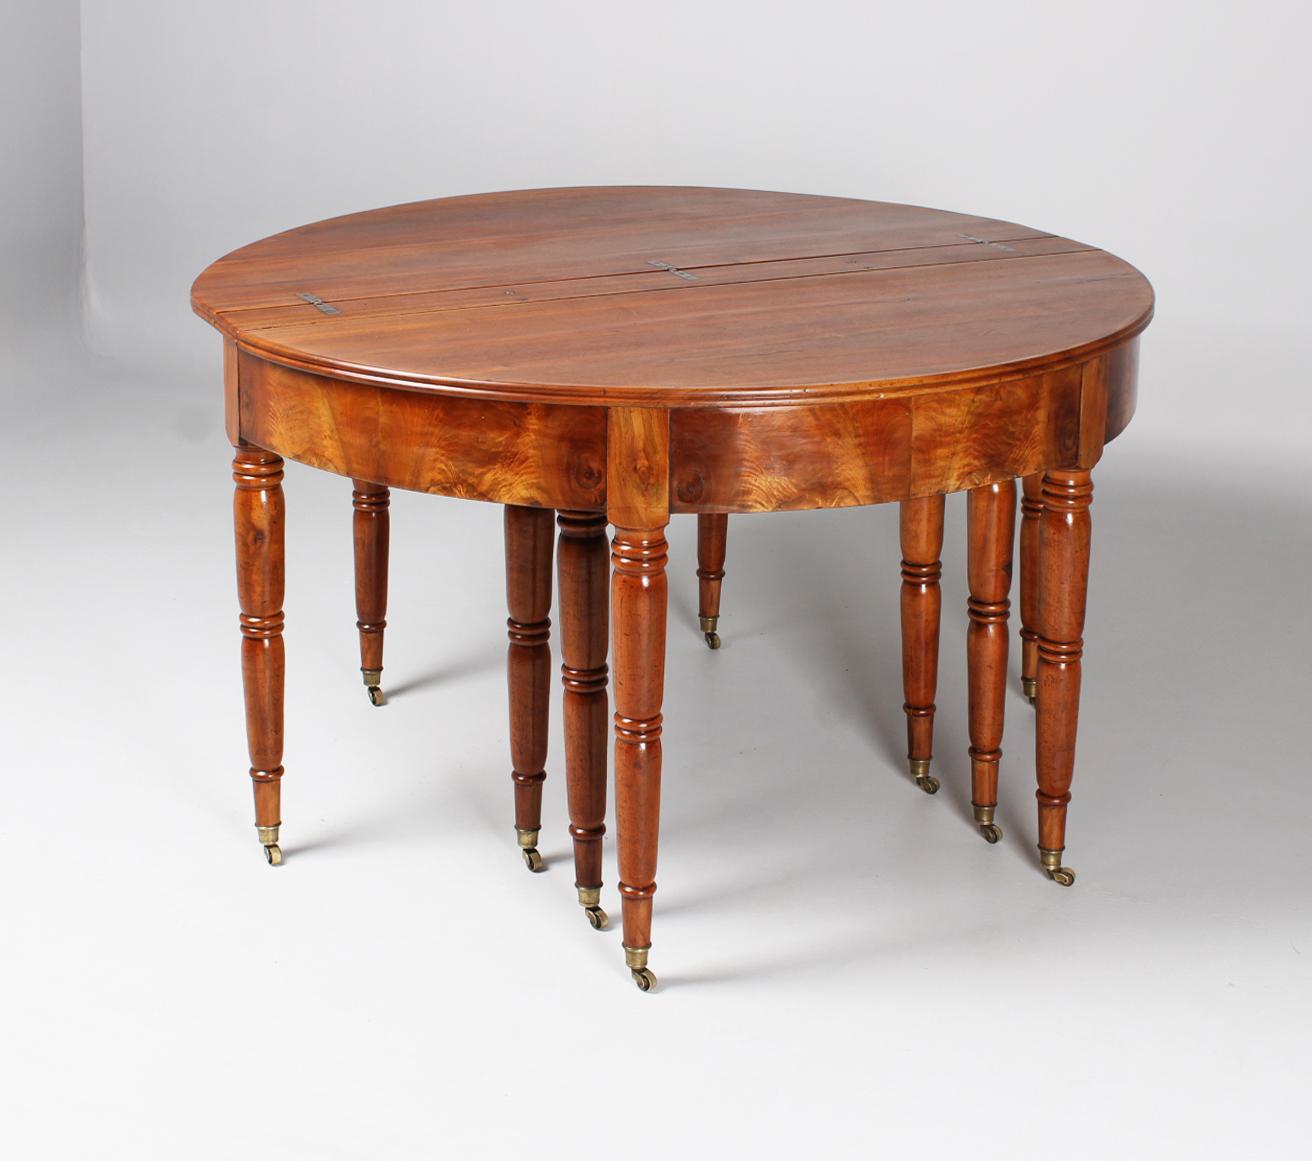 Large 19th Century Dining Table, Walnut, 12-16 People 12